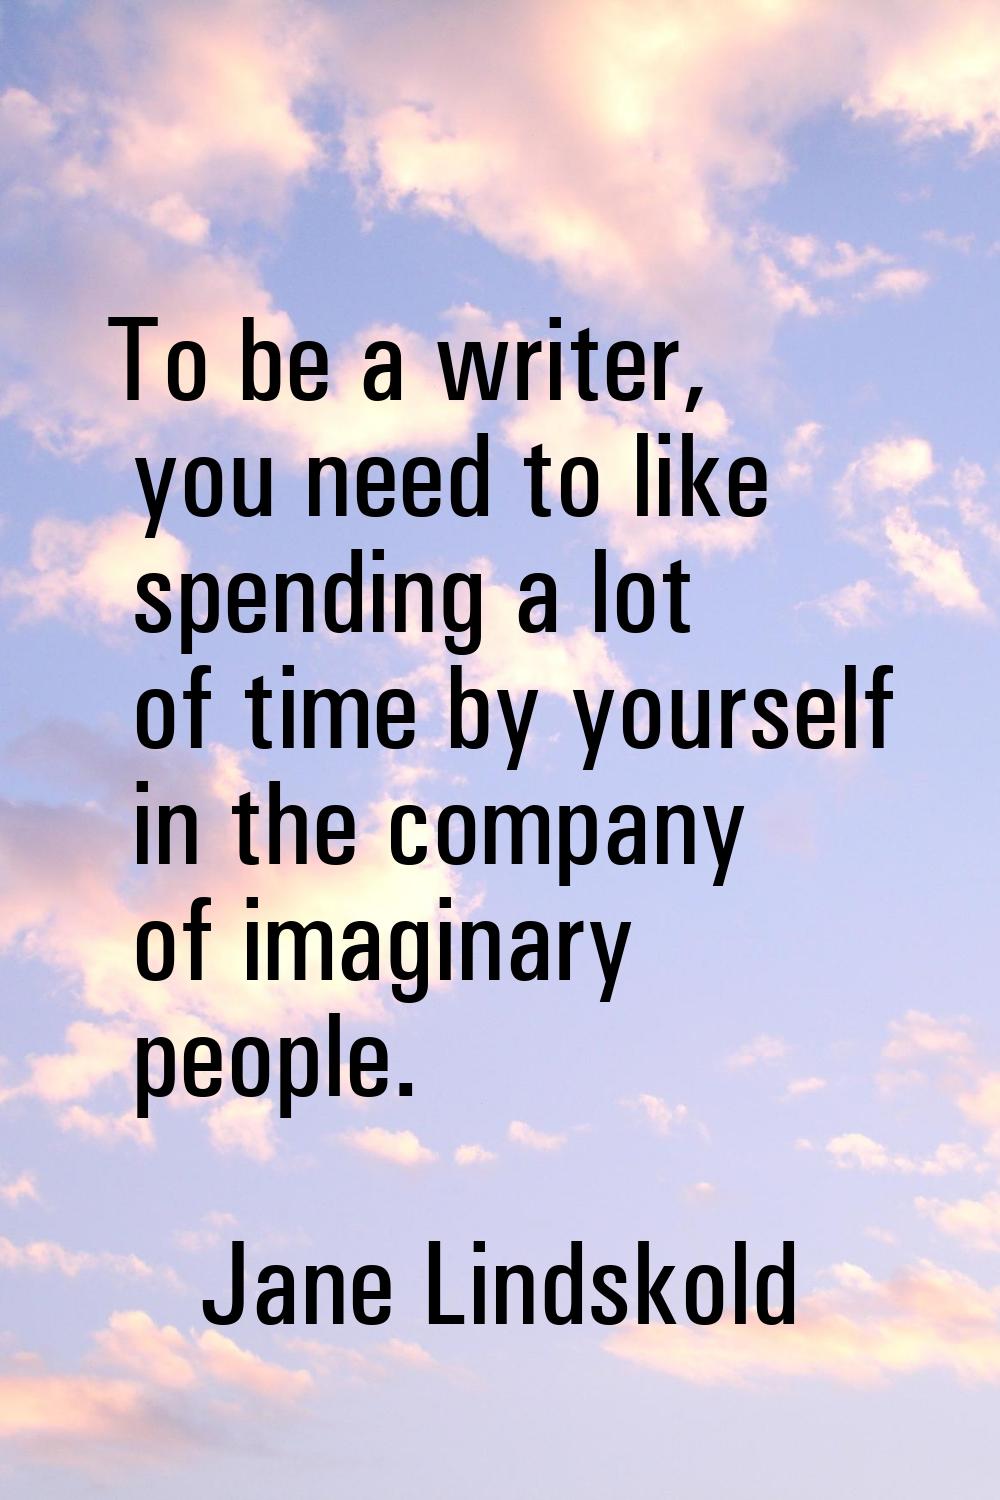 To be a writer, you need to like spending a lot of time by yourself in the company of imaginary peo